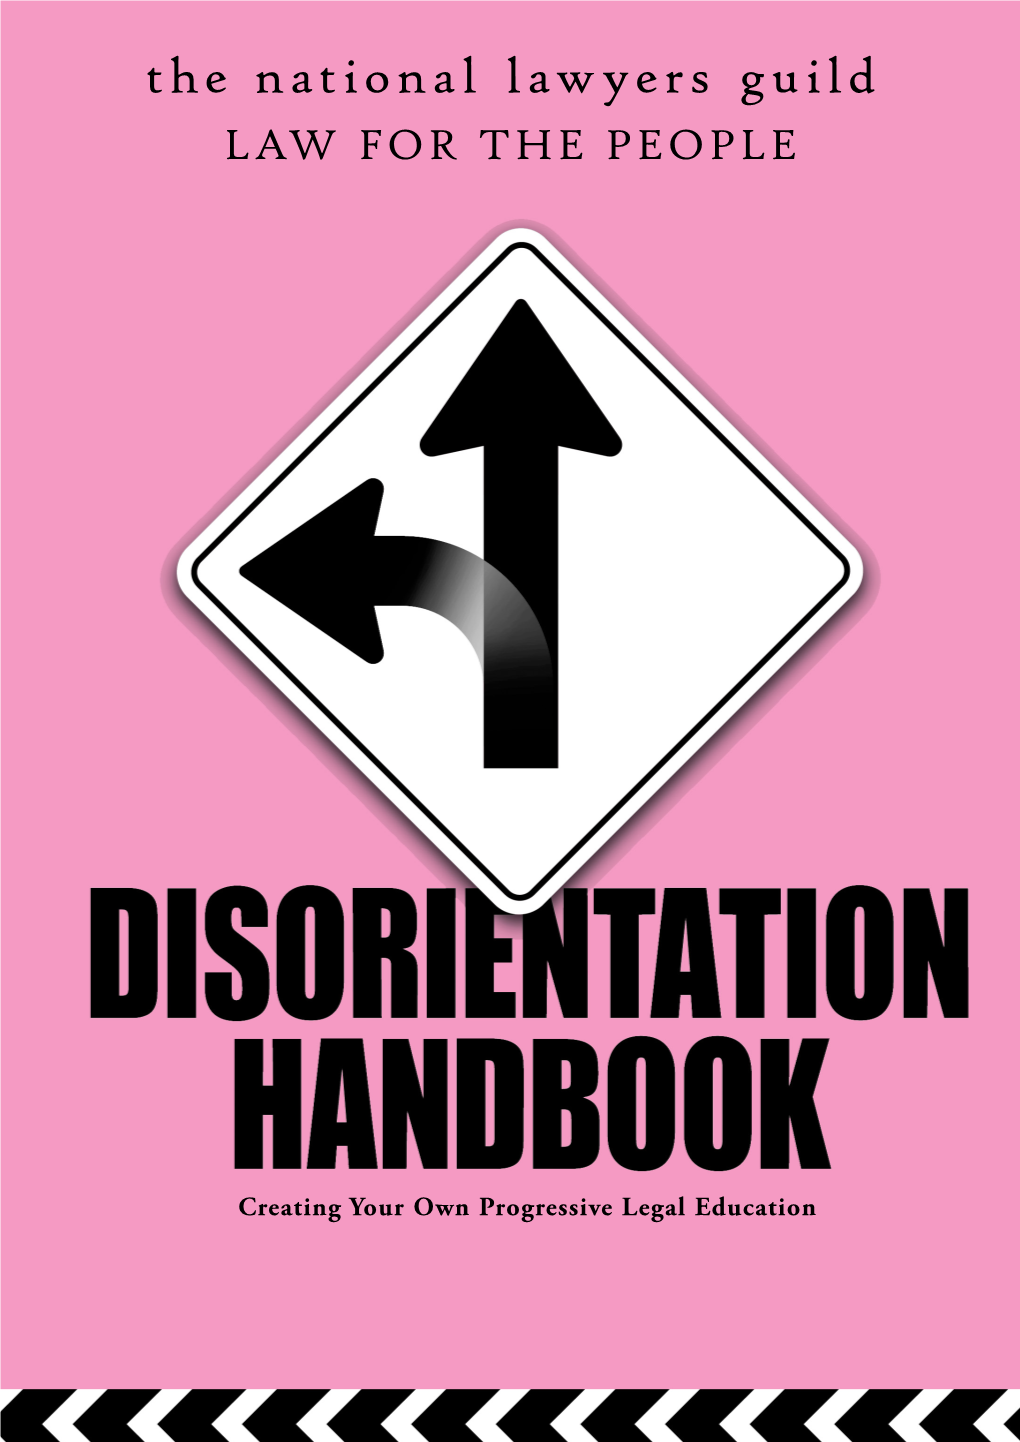 Disorientation Handbook 1 History of the National Lawyers Guild